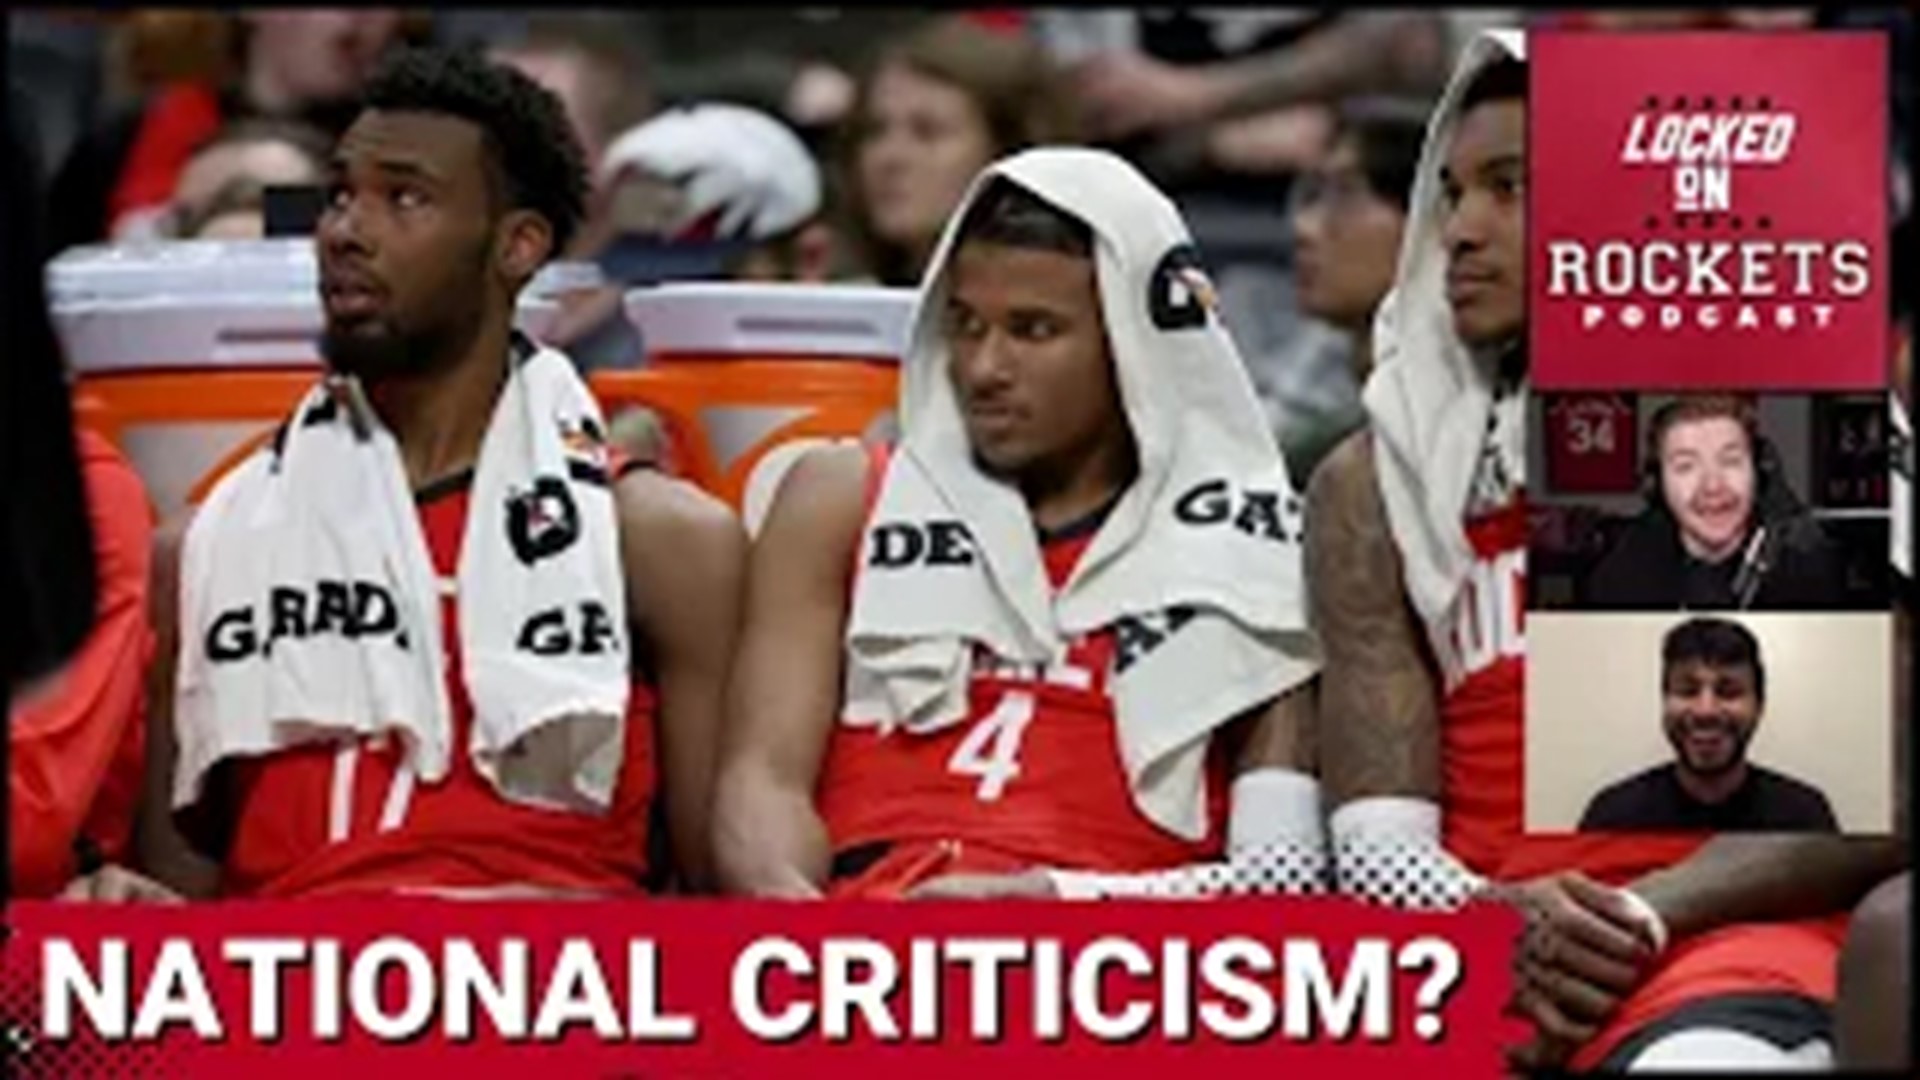 Host Jackson Gatlin (@JTGatlin) is joined by weekly cohost Alykhan Bijani (@Rockets_Insider) to discuss and react to national criticism